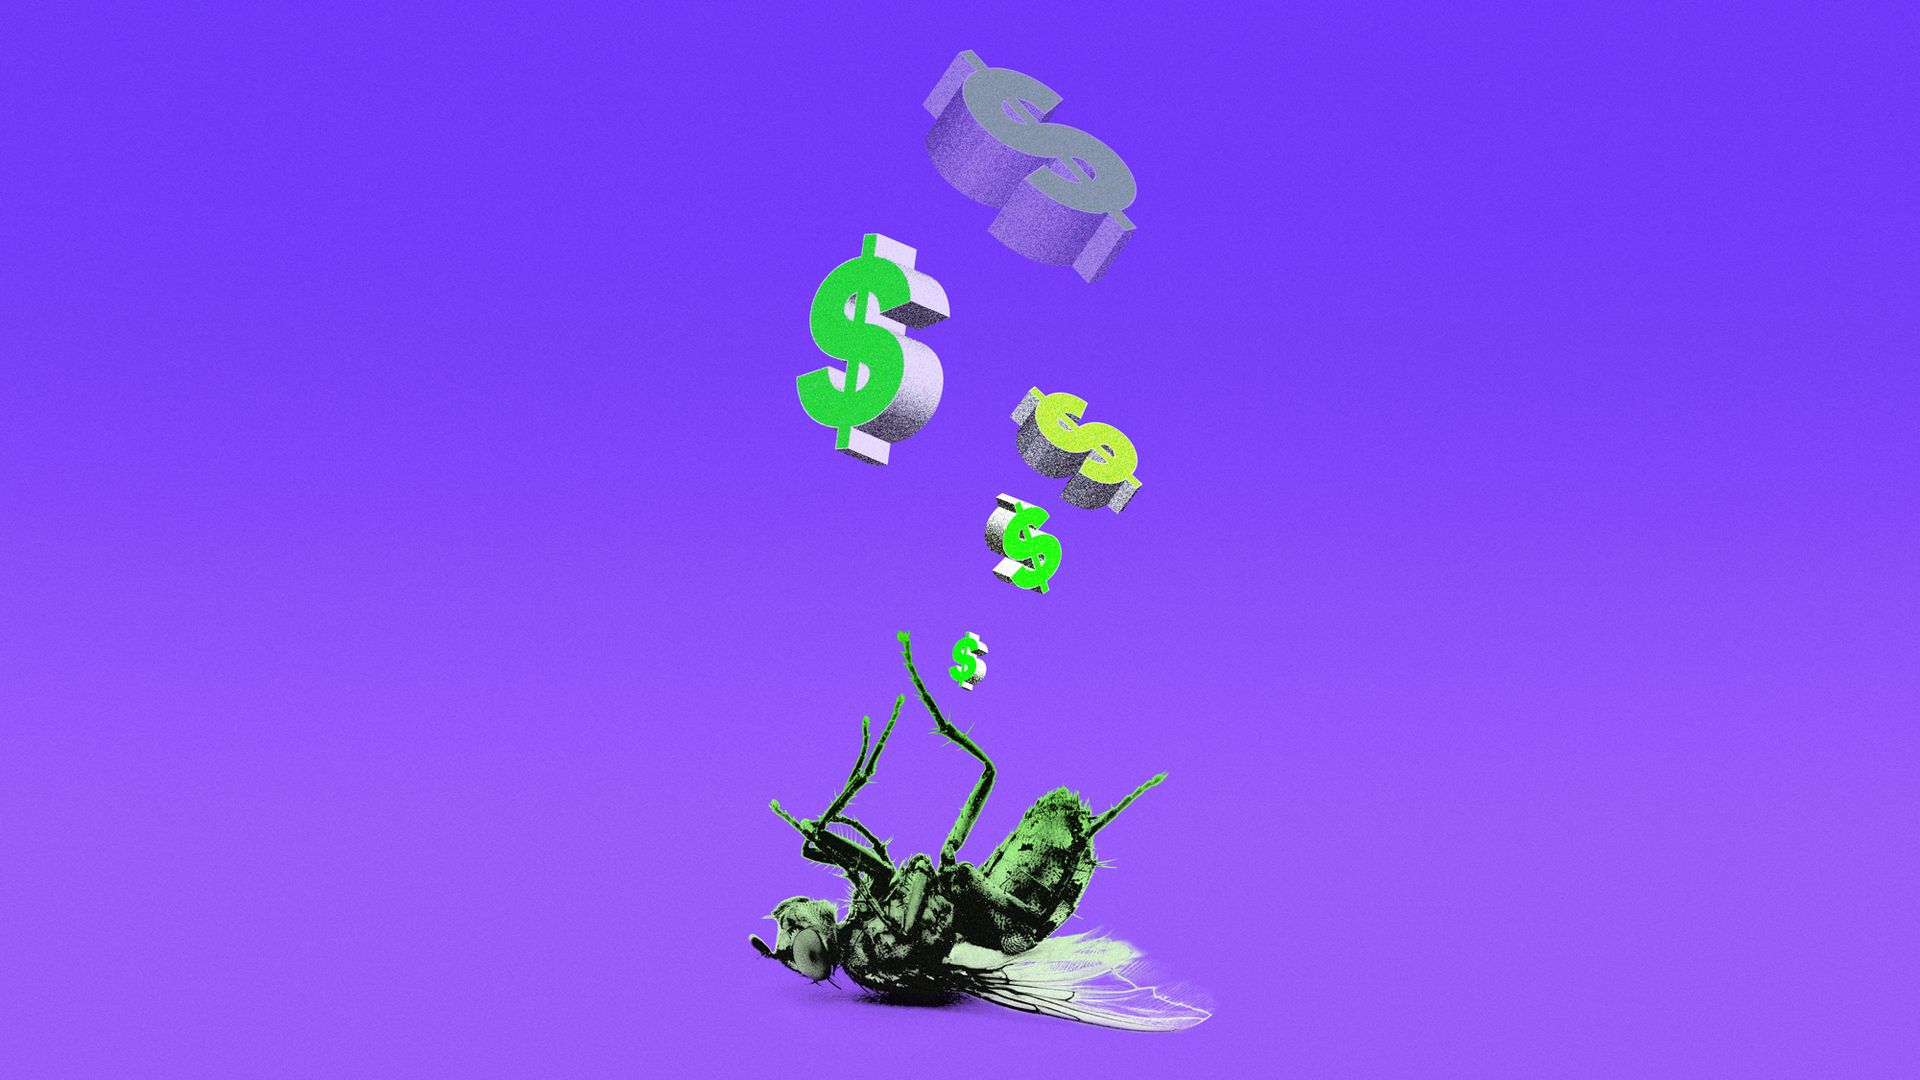 Dead bee with dollar signs floating above it